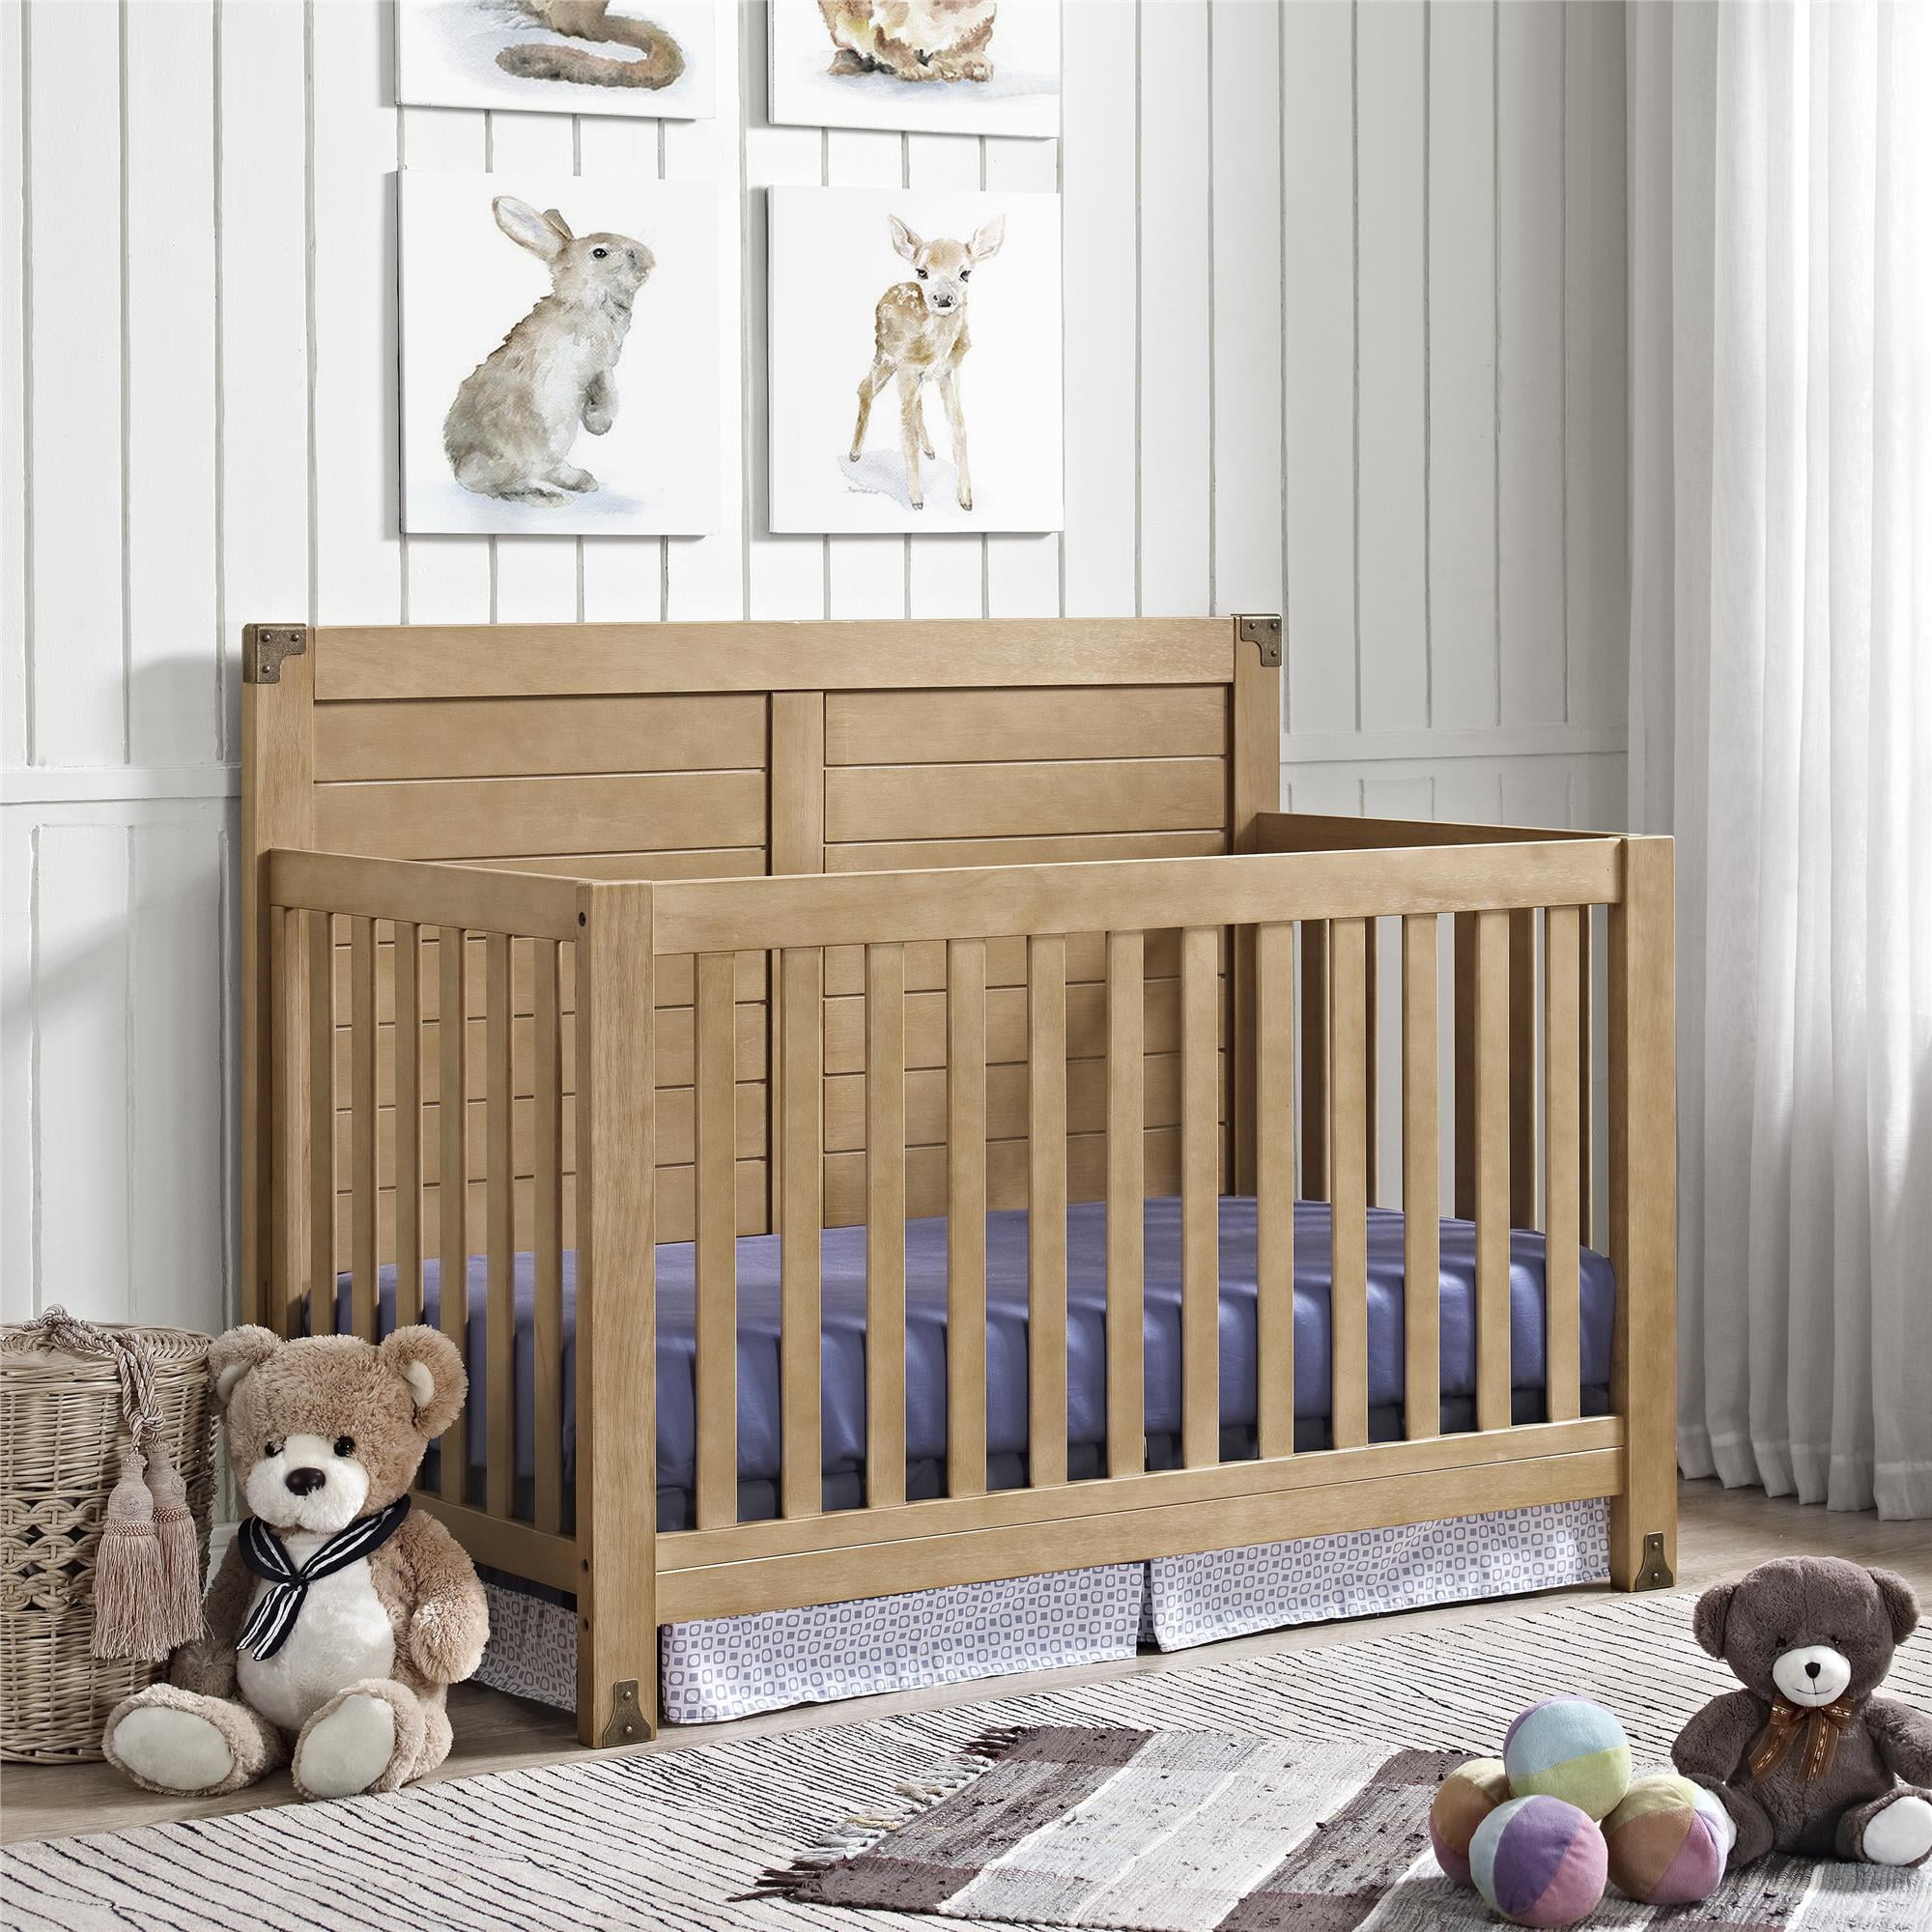 What is the average cost of a baby crib?